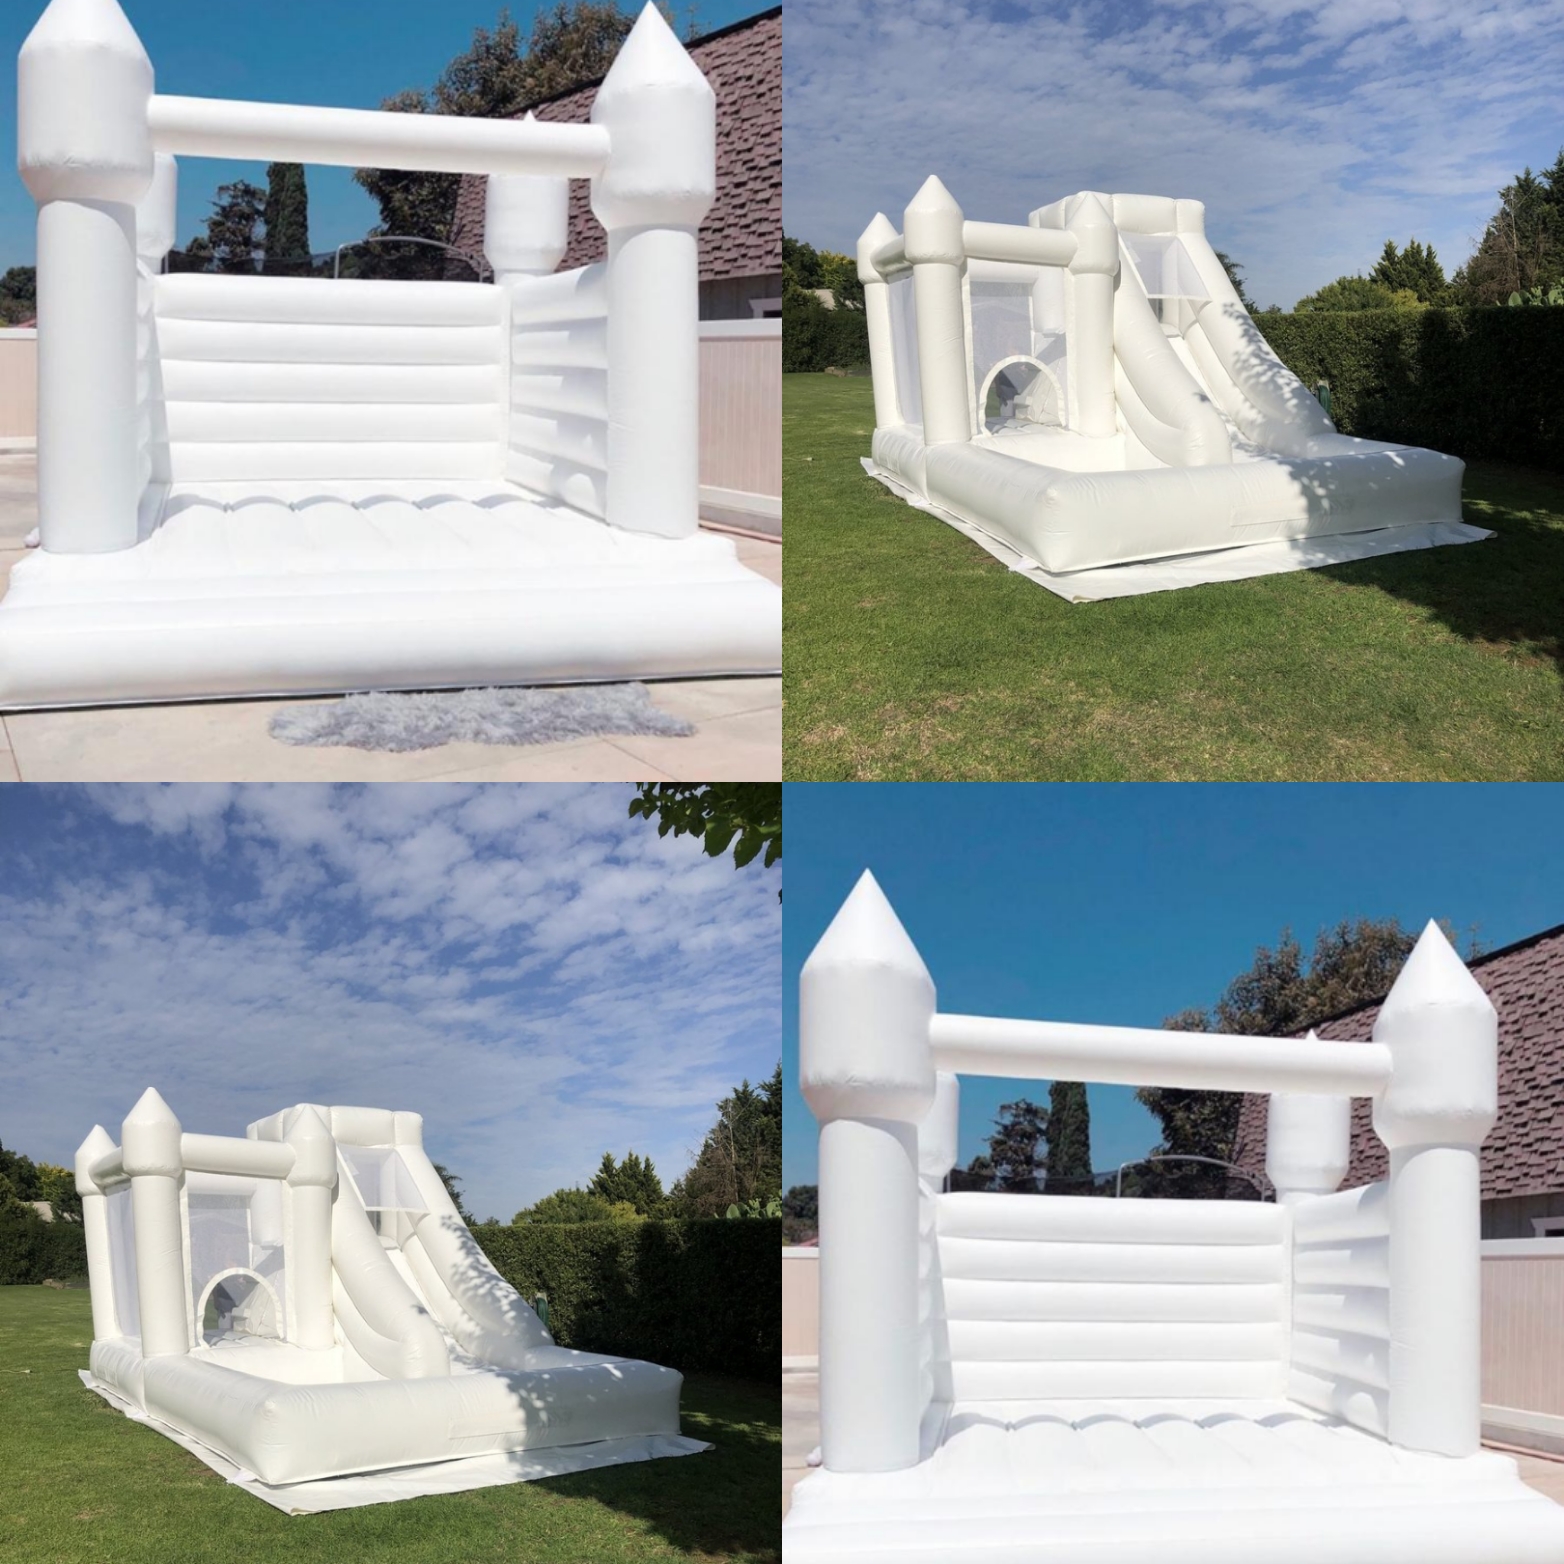 Inflatable castles